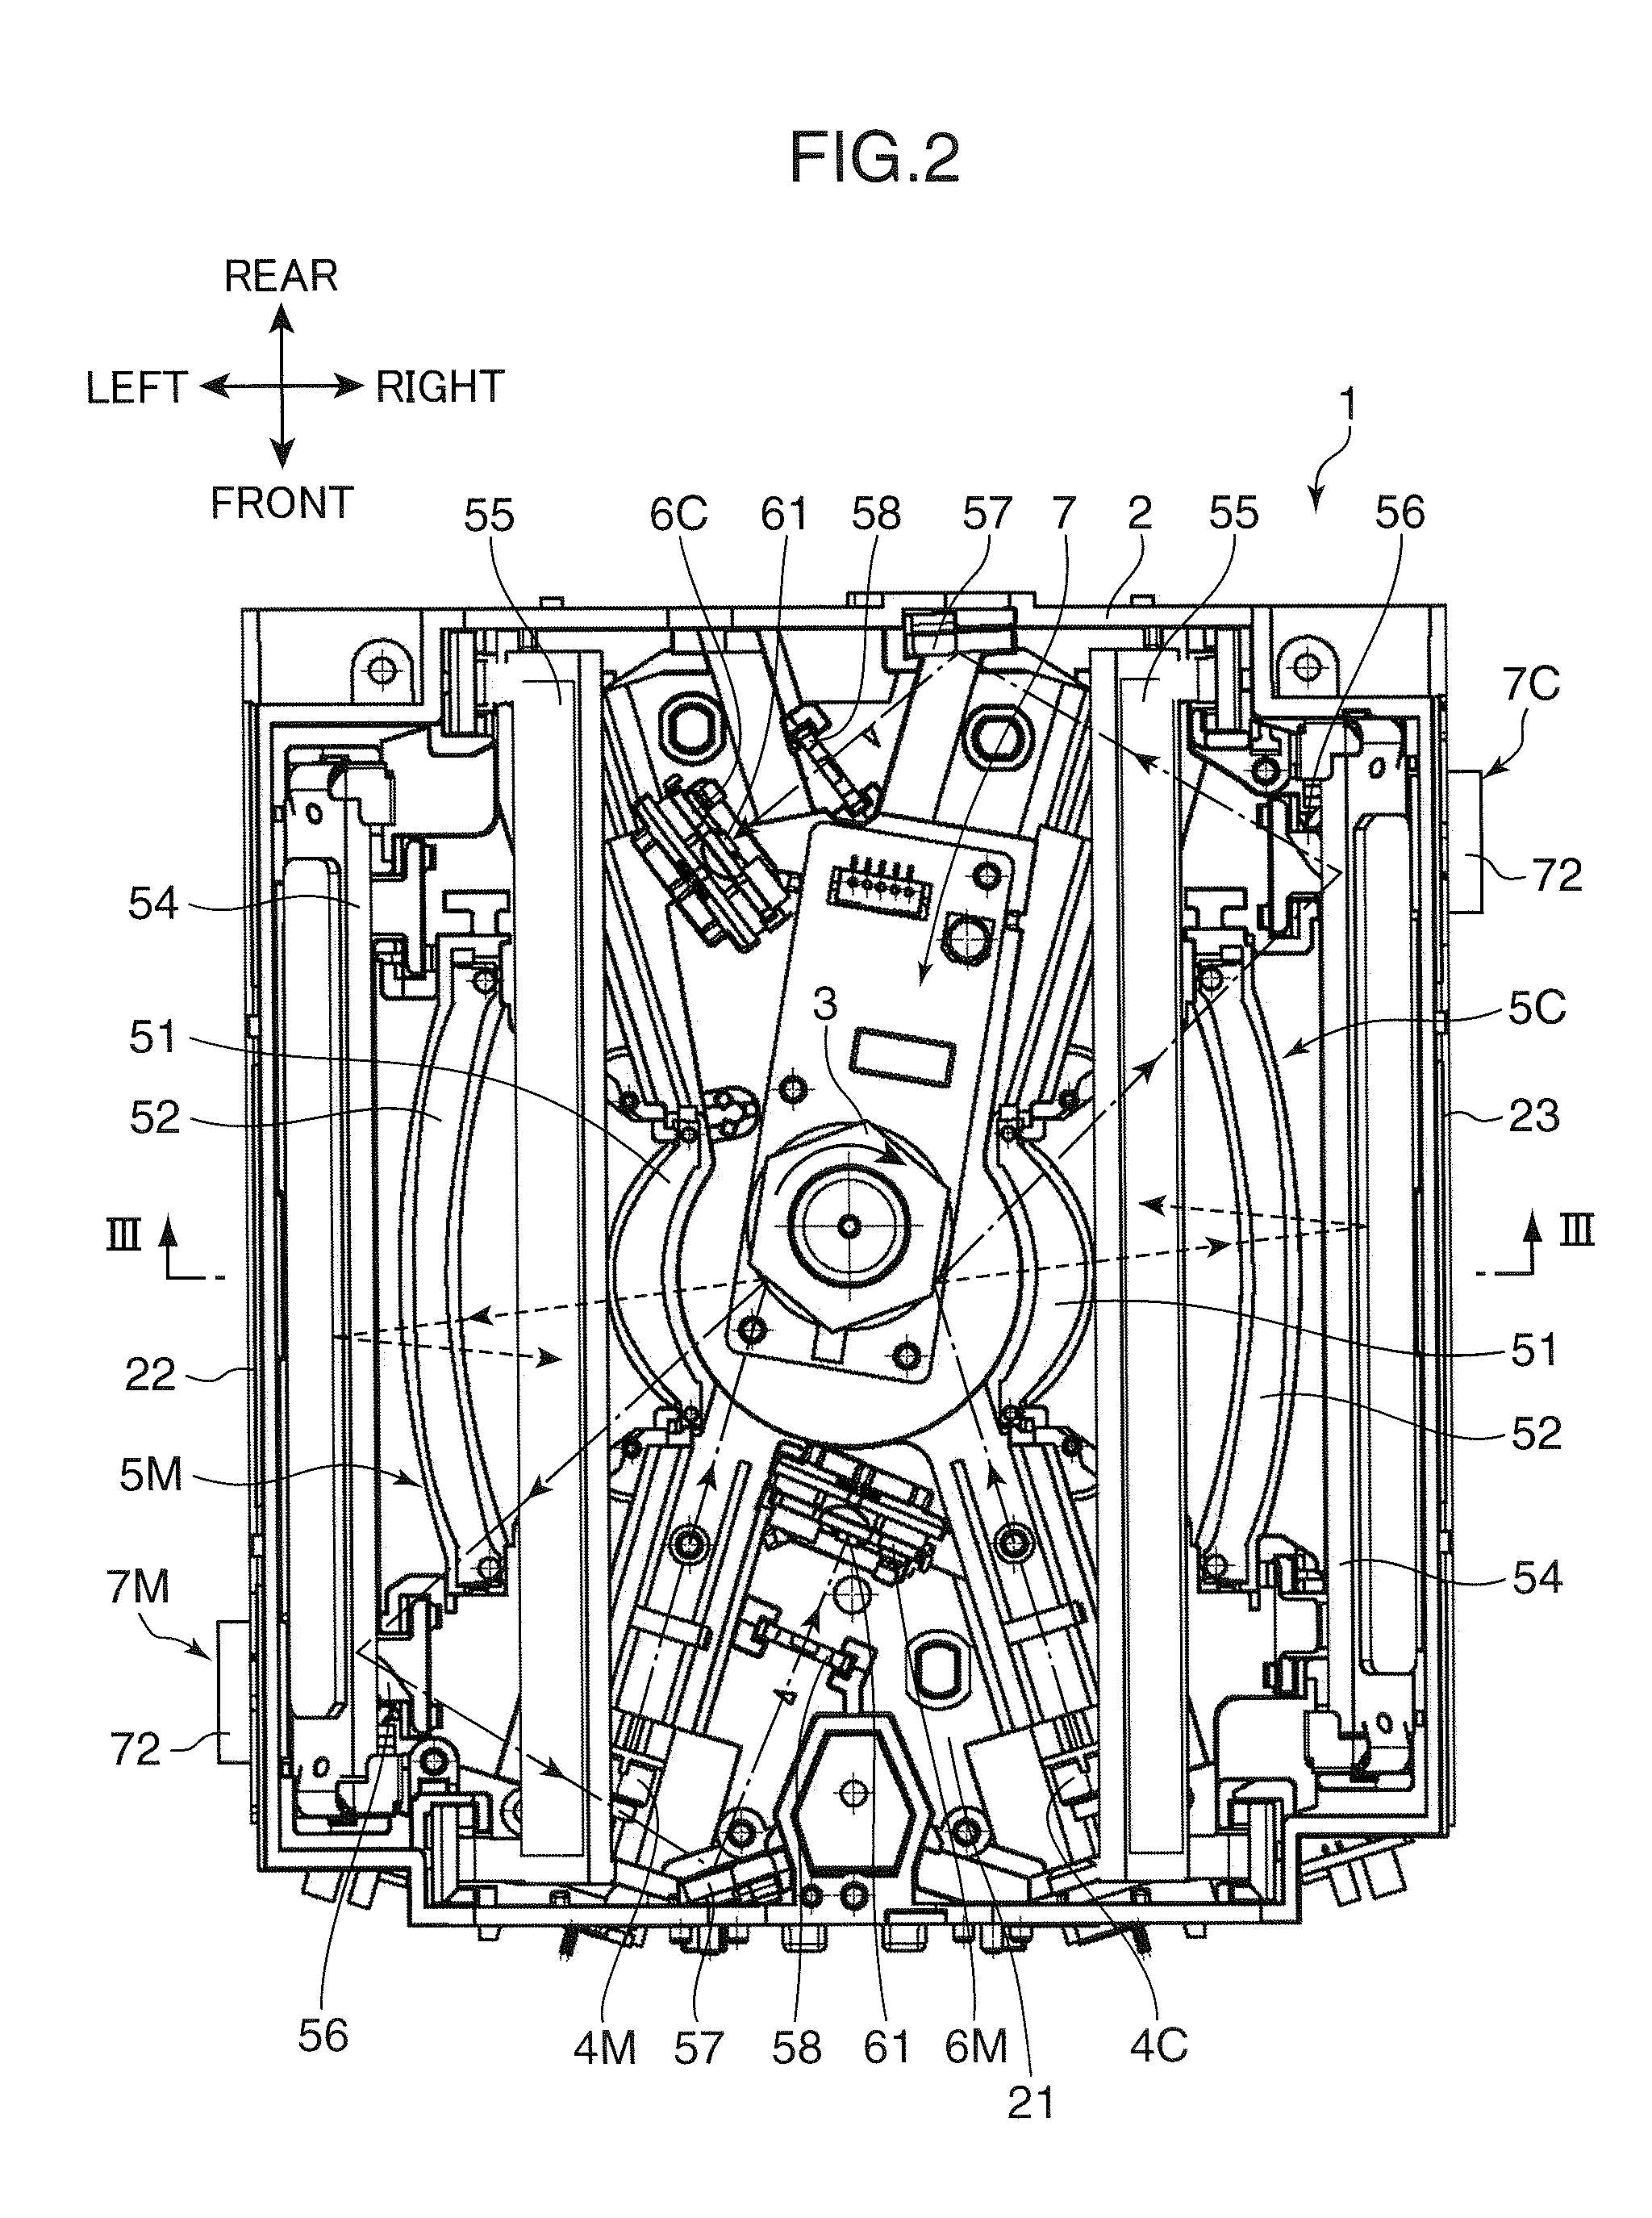 Optical scanner for image forming apparatus